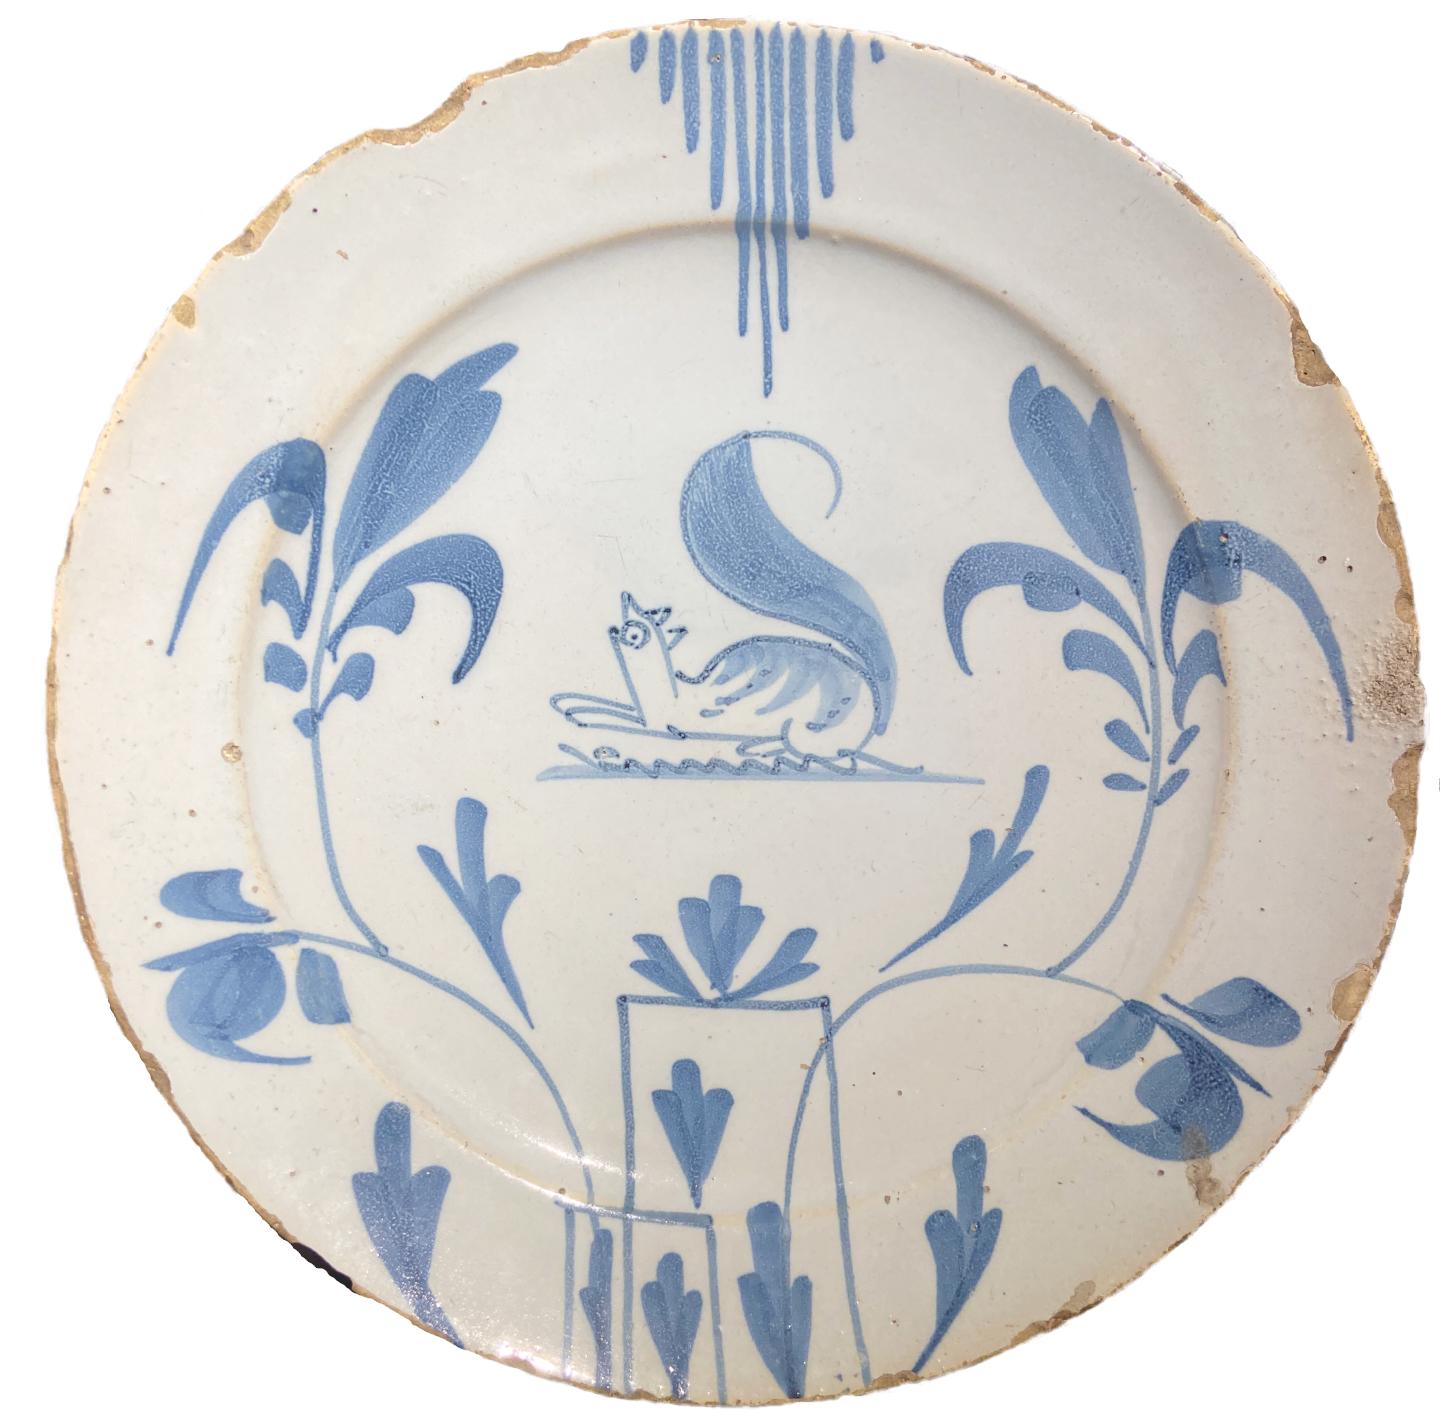 Lambeth Plate, English Delftware, Blue and White Design c. 1750 - Art by Unknown